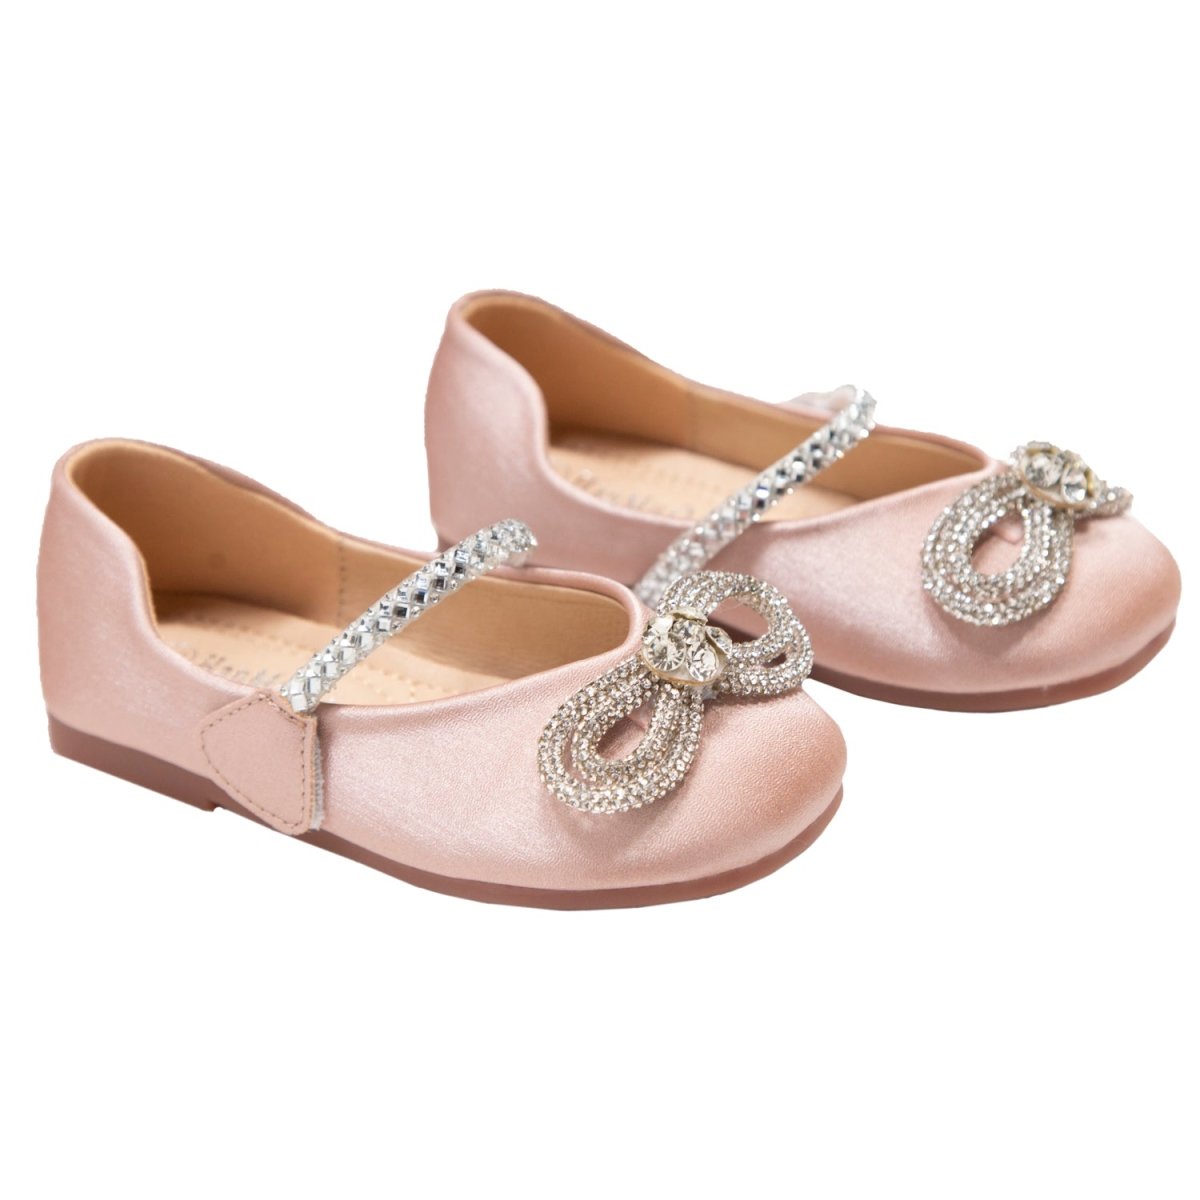 MACH CRYSTAL BOW SHOES - FLATS